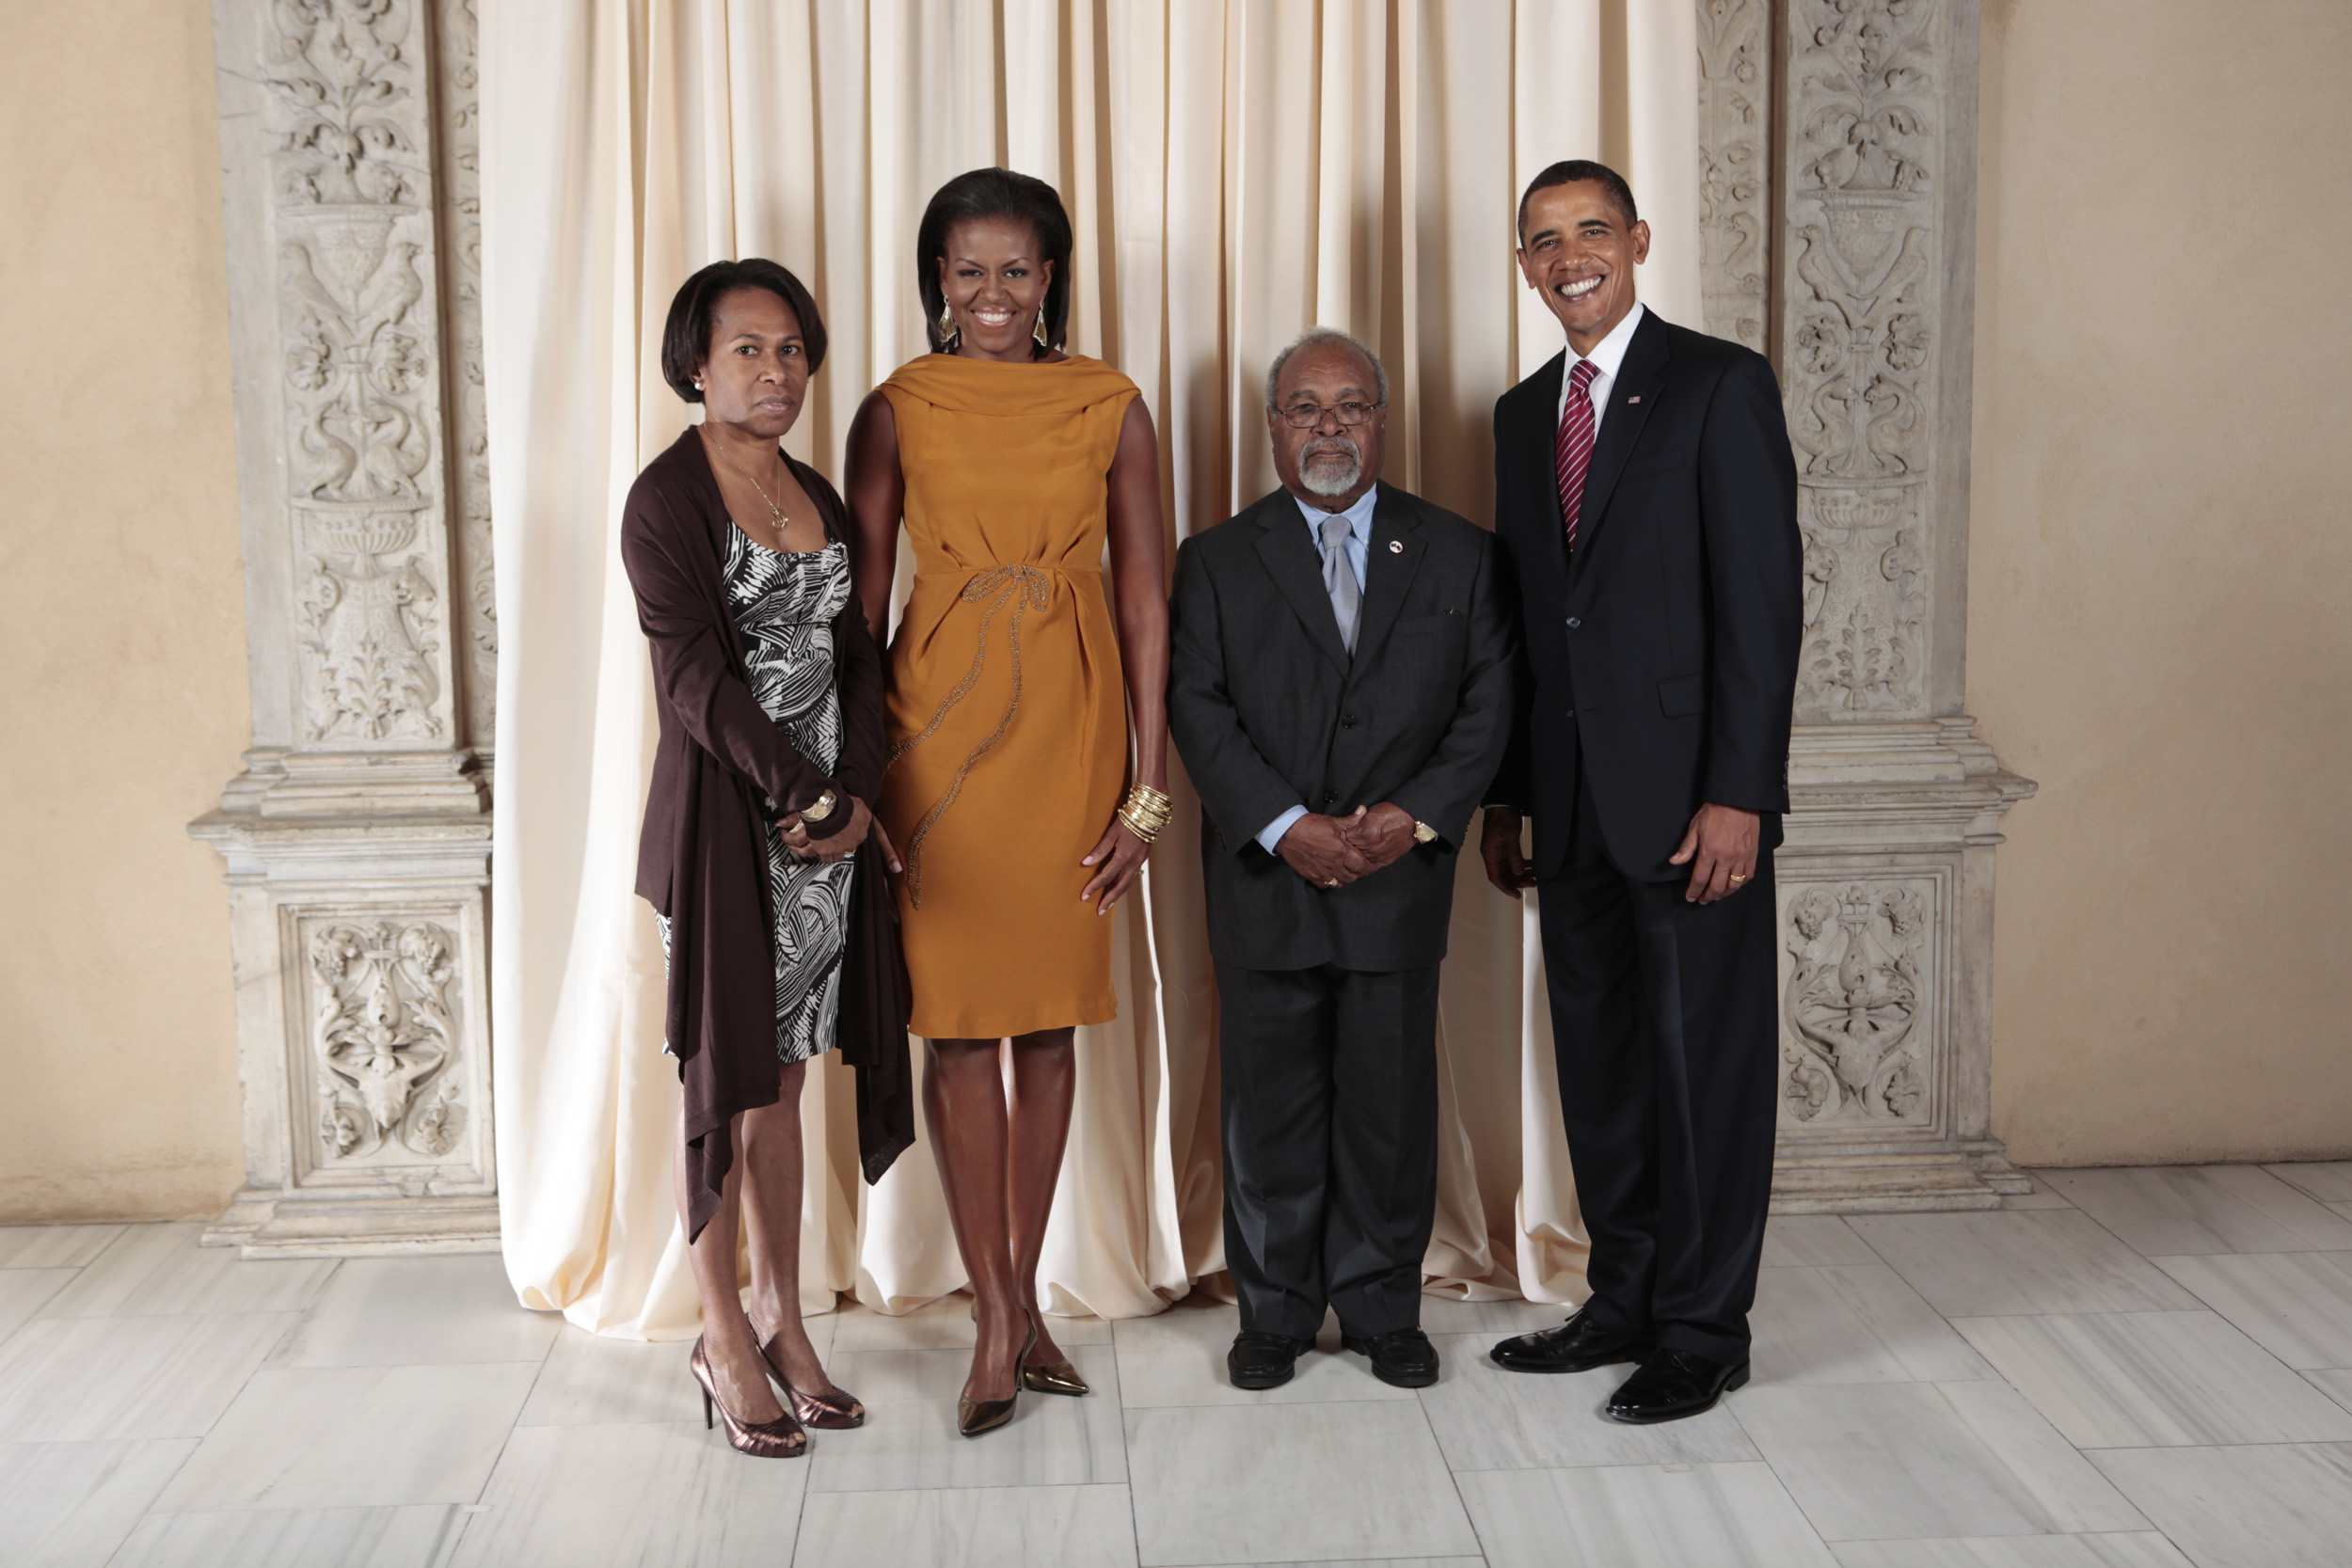 Michael Somare with Obamas